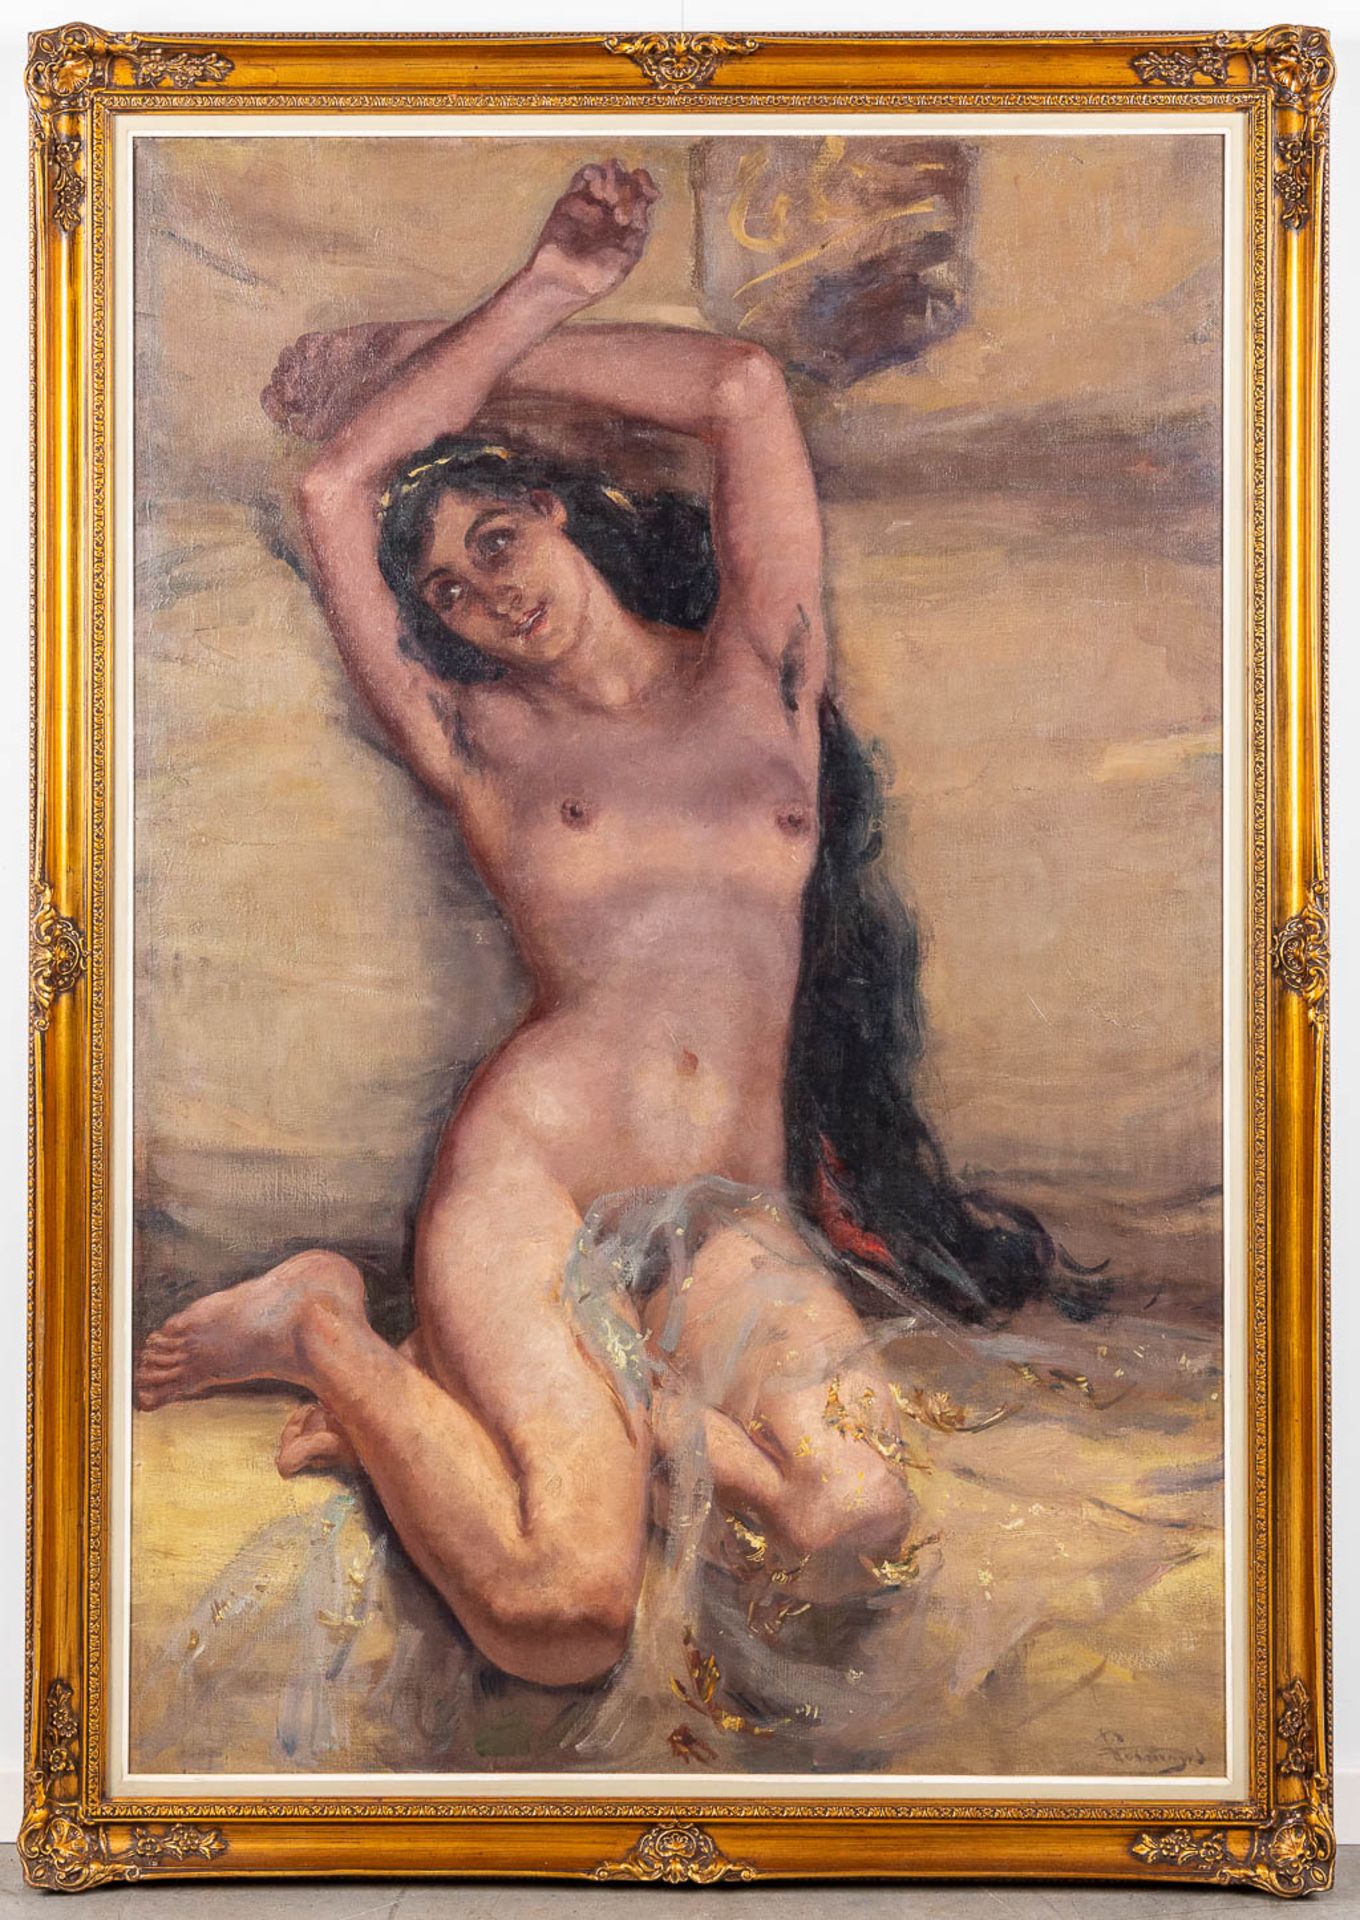 Charles HERMANS (1839-1924) 'Nude' oil on canvas. (W: 97 x H: 145 cm) - Image 3 of 7